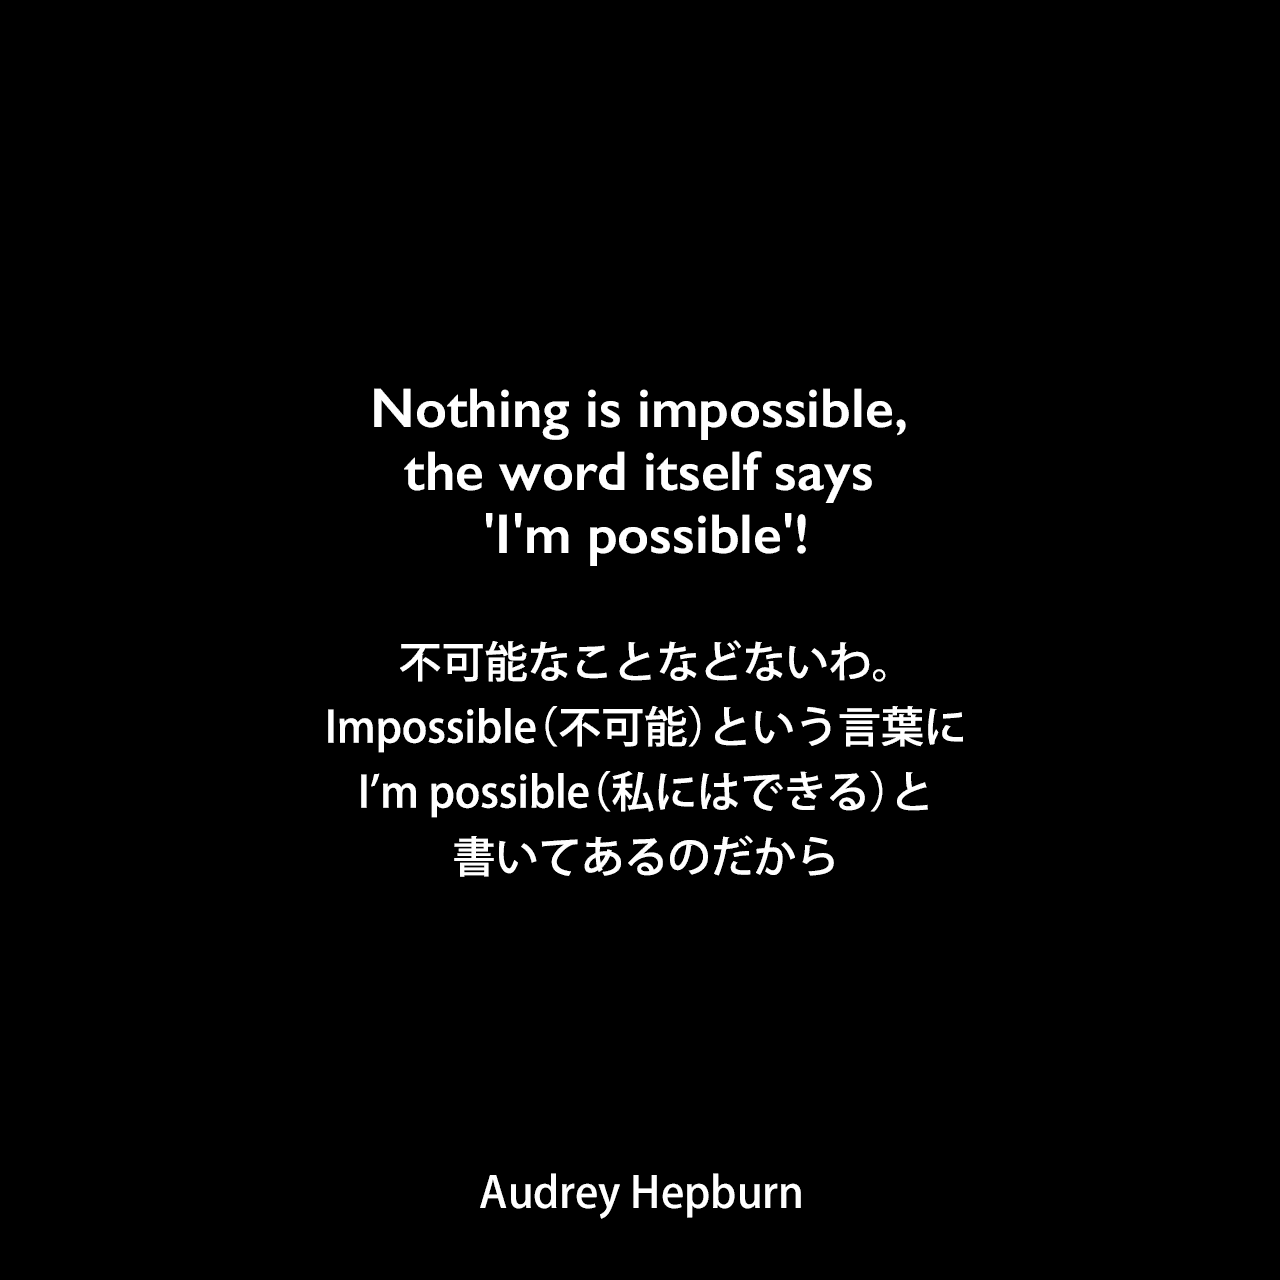 Nothing is impossible, the word itself says ‘I’m possible’!不可能なことなどないわ。Impossible（不可能）という言葉に、I’m possible（私にはできる）と書いてあるのだから